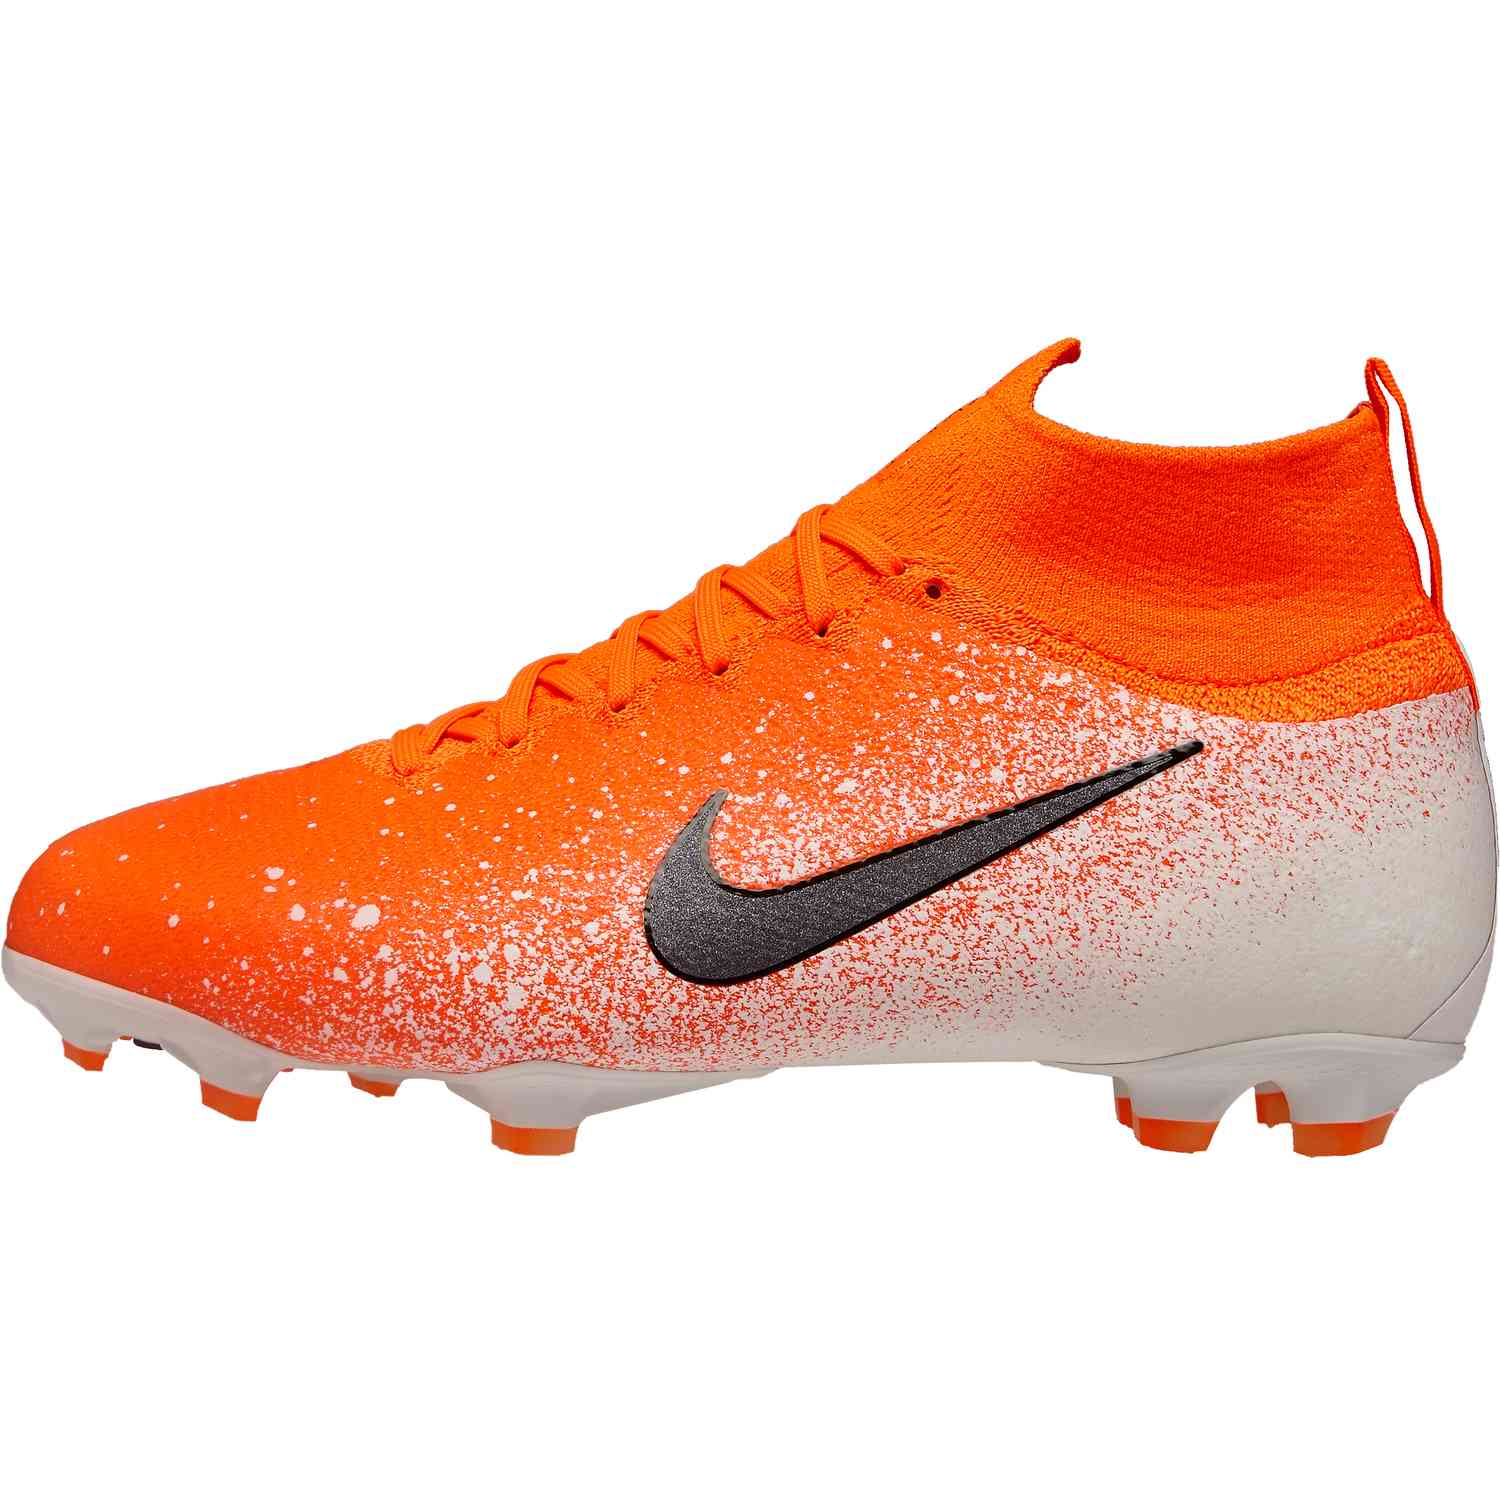 The Newest Nike Mercurial Superfly VI 'LVL UP' Elite IC.